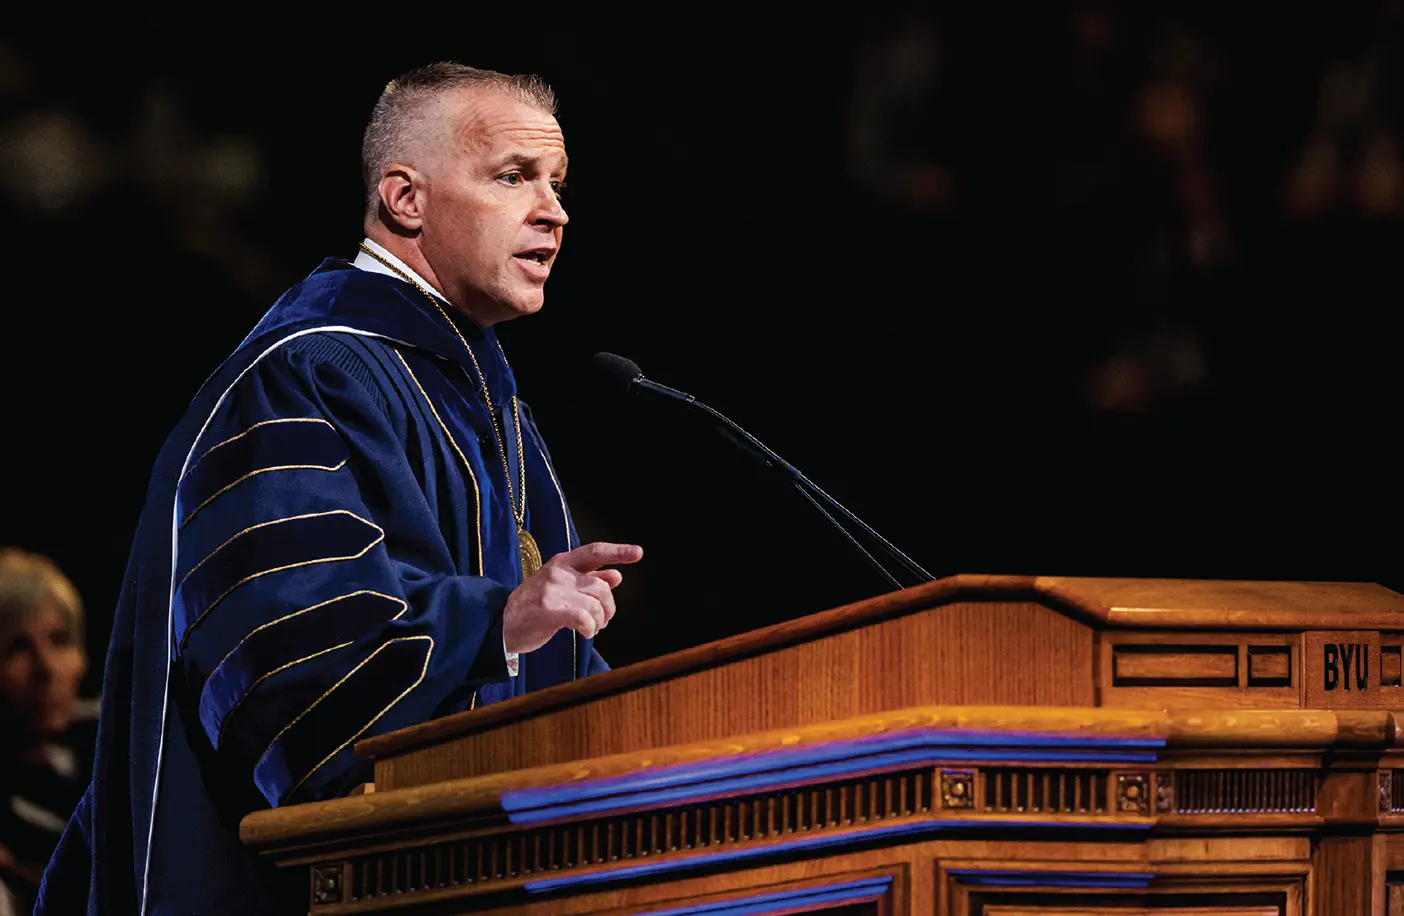 BYU president C. Shane Reese standing at a pulpit speaking at his inauguration.